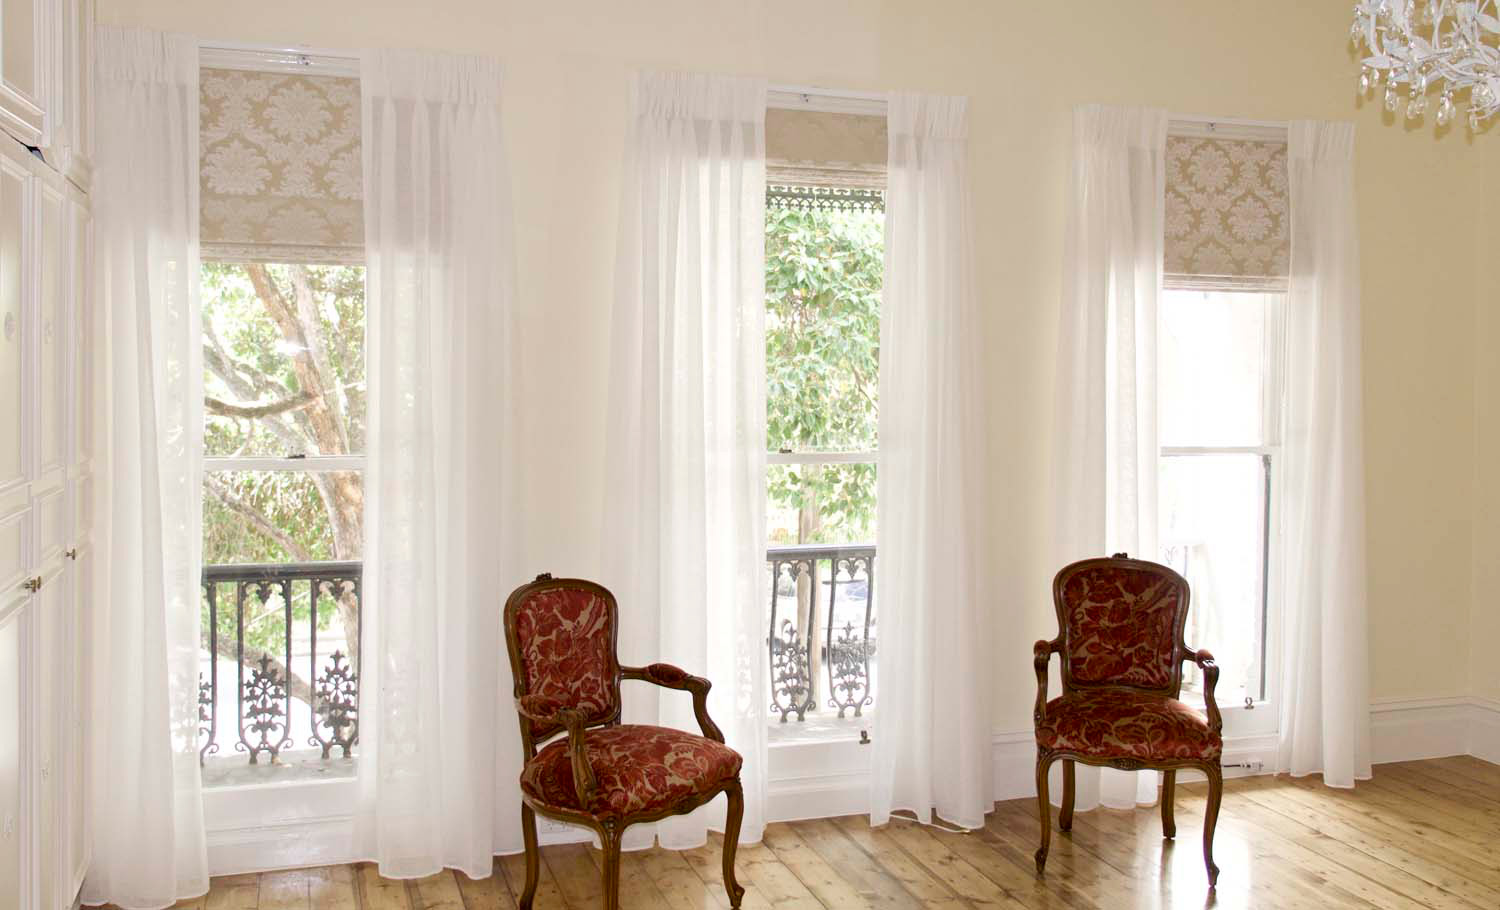 5 French style interior, two french chairs, rich demask fabric and sheer curtains